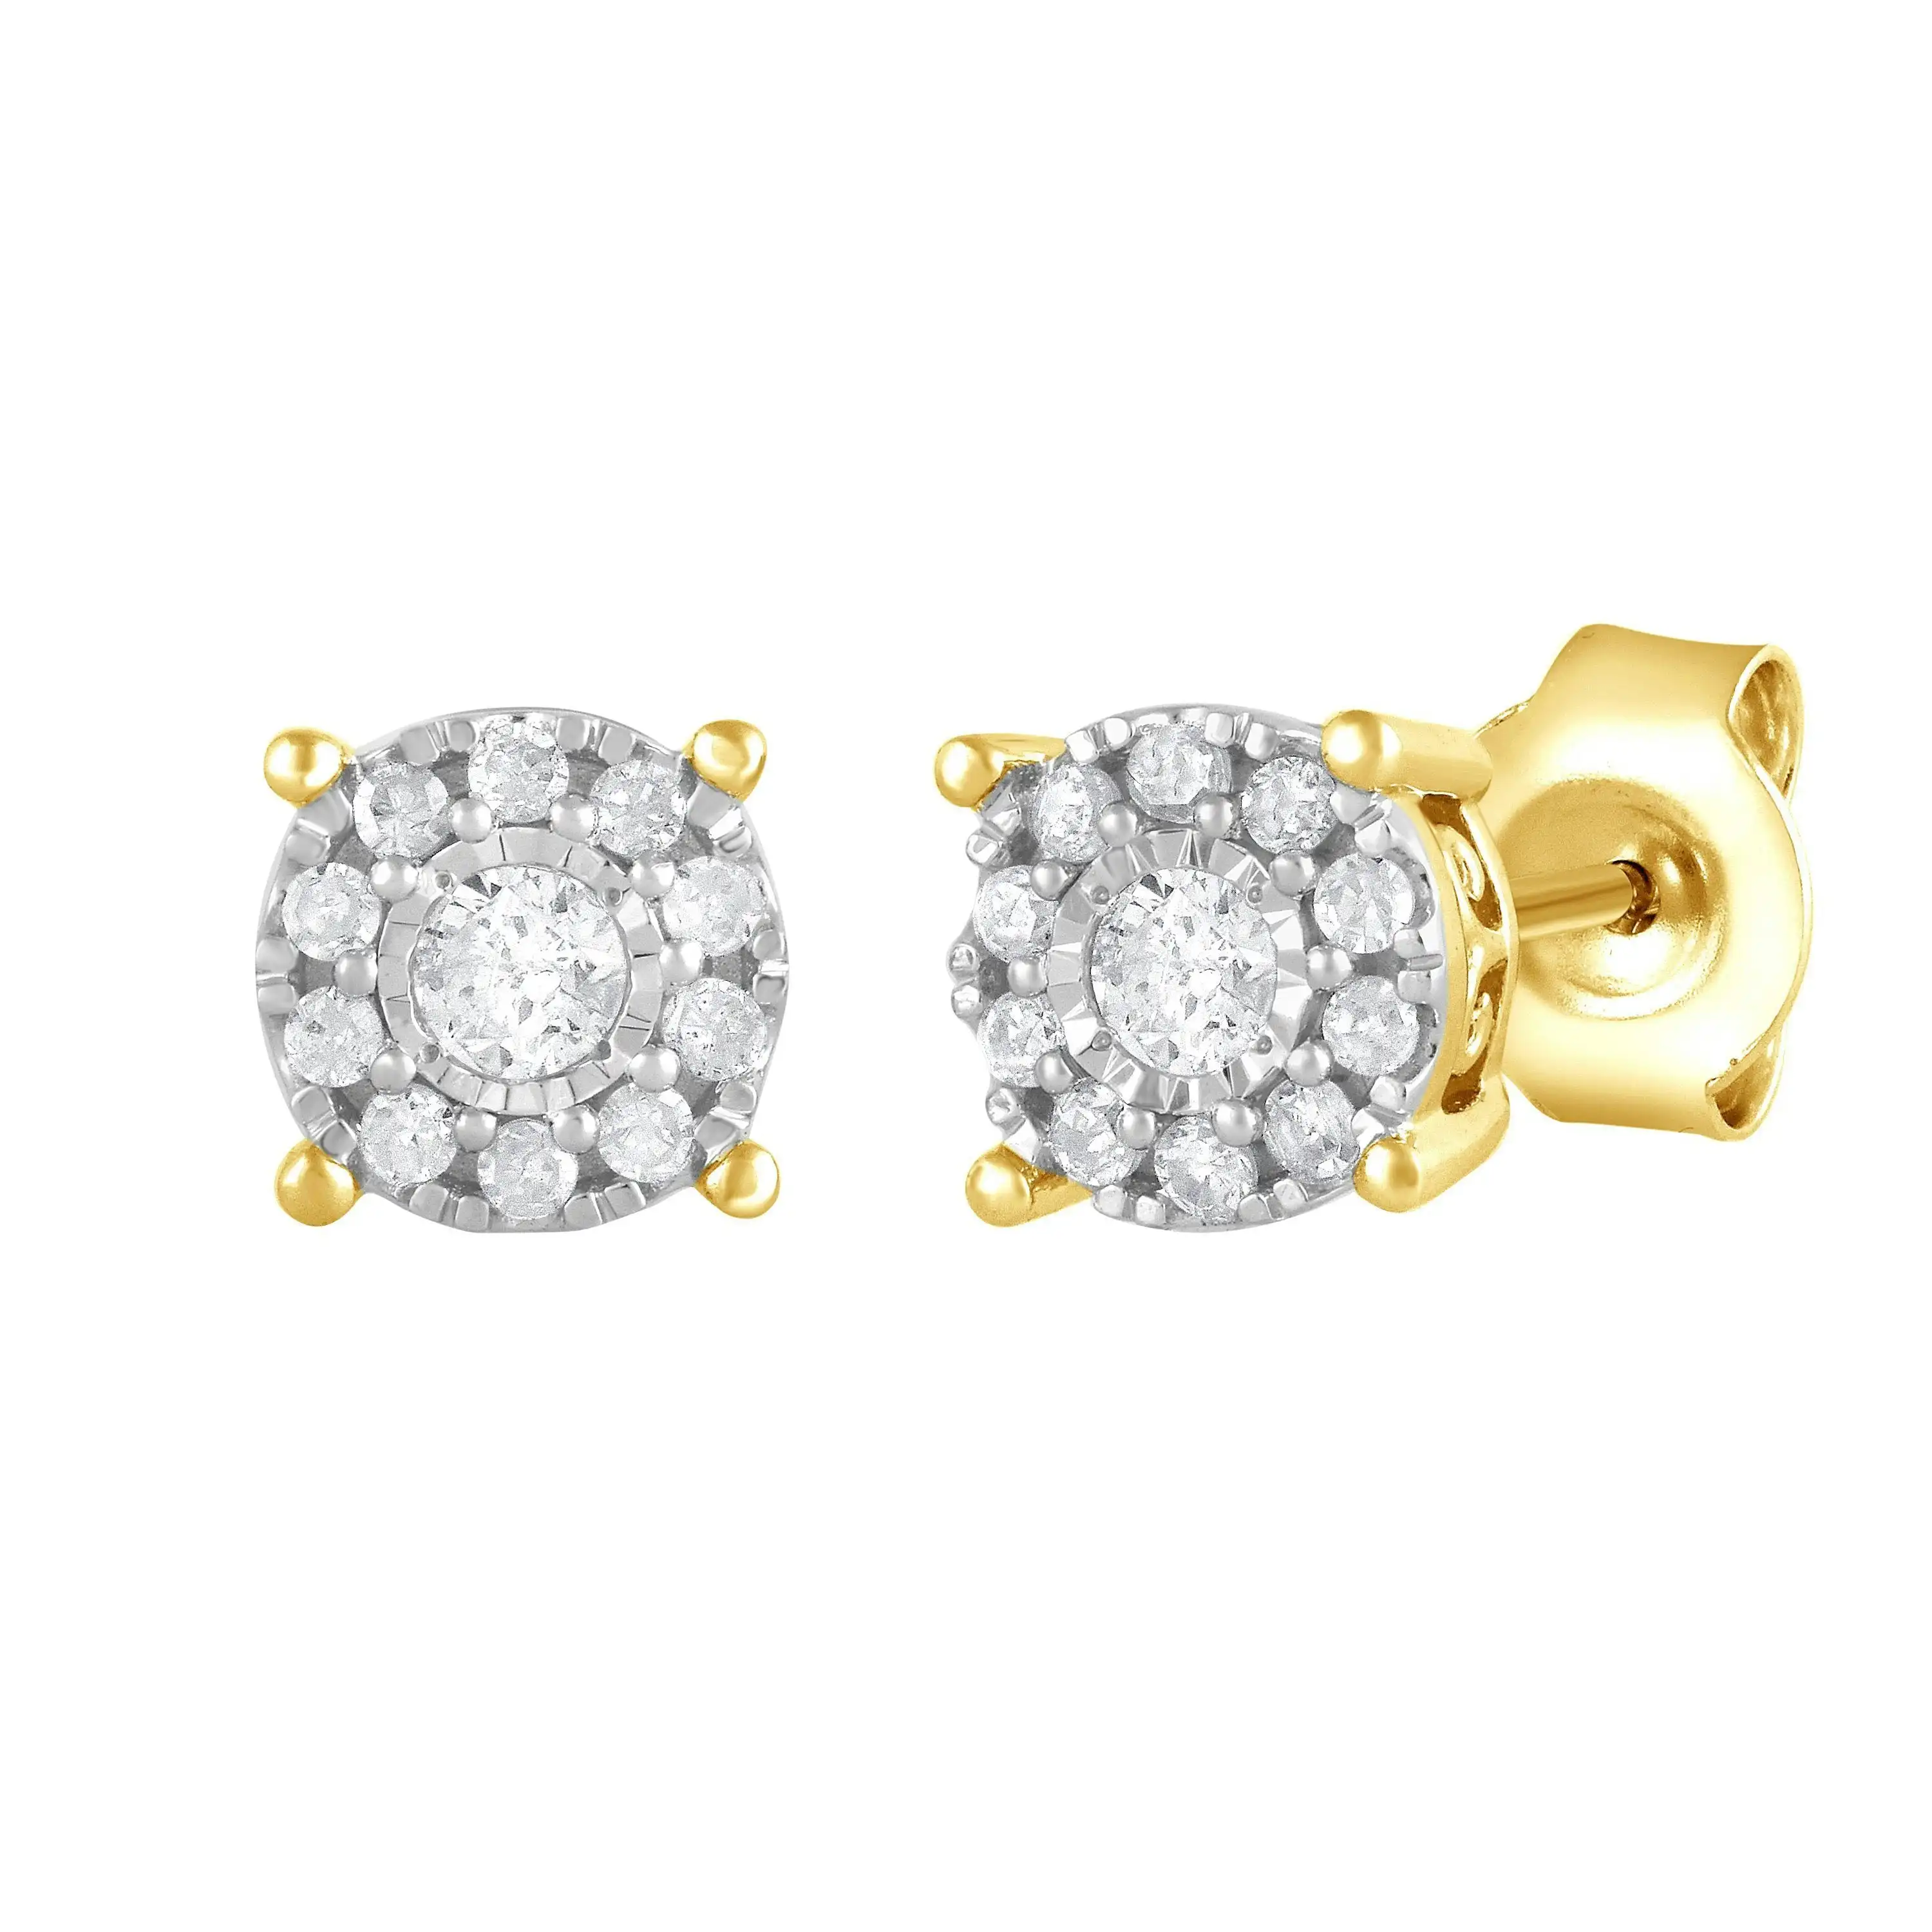 Miracle Surround Stud Earrings with 1/4ct of Diamonds in 9ct Yellow Gold